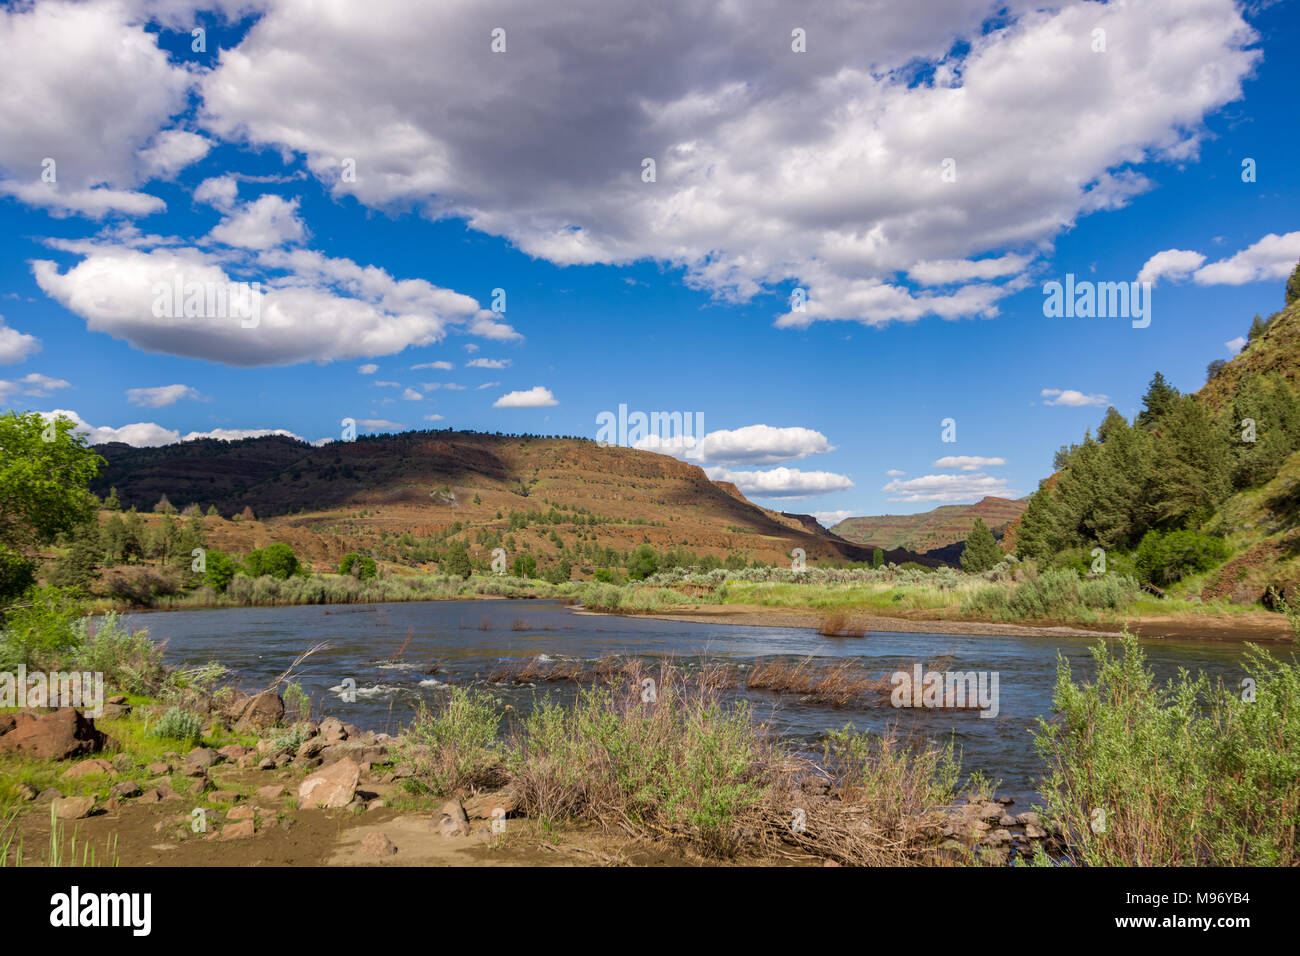 A riverbend in the John Day River, near Spray Oregon. Low clouds create shadows on a nearby hill. Stock Photo